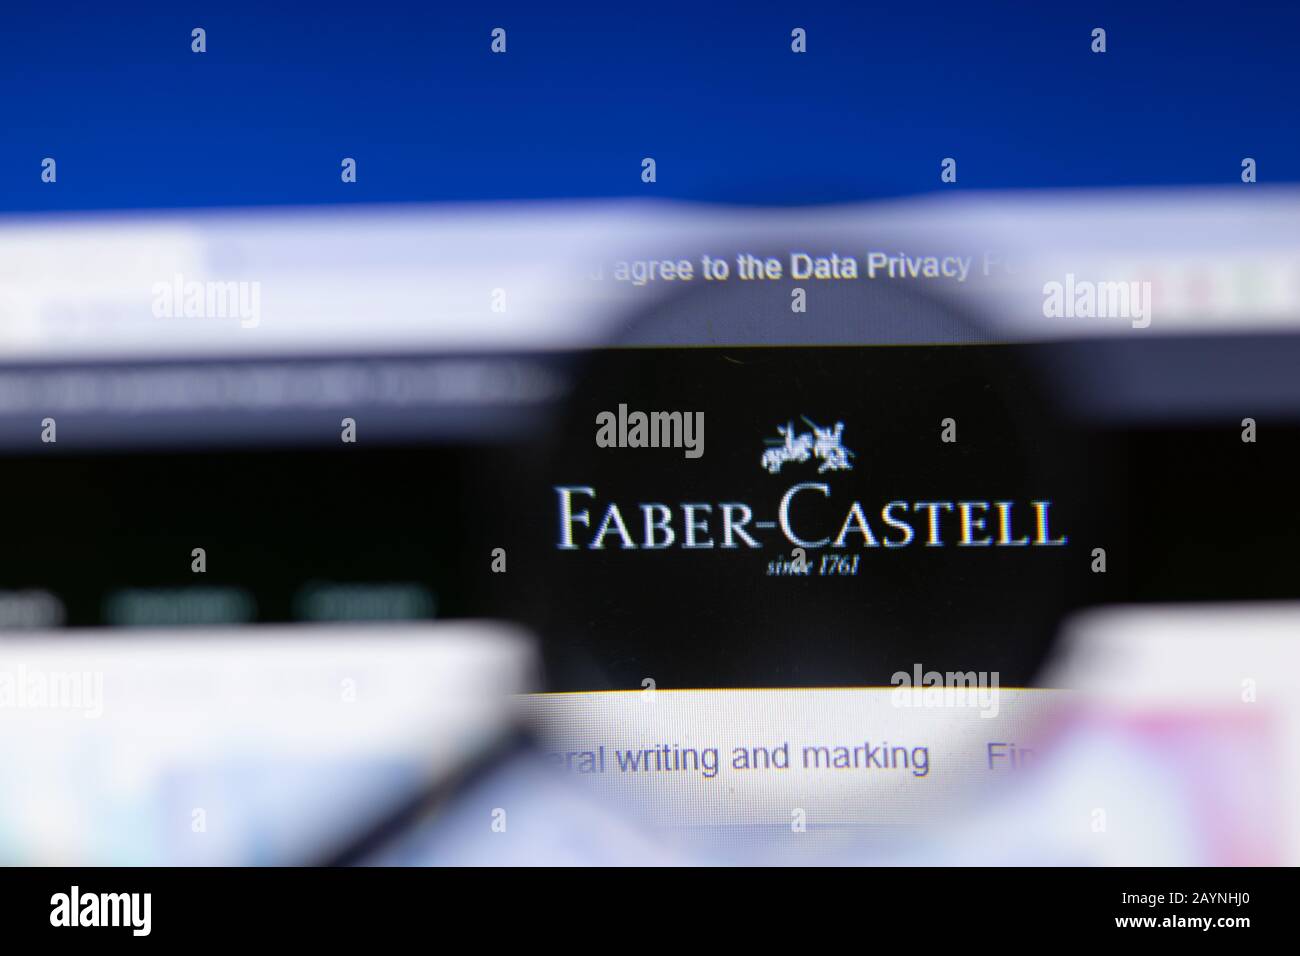 Saint-Petersburg, Russia - 18 February 2020: Faber-Castell company website page logo on laptop display. Screen with icon, Illustrative Editorial Stock Photo